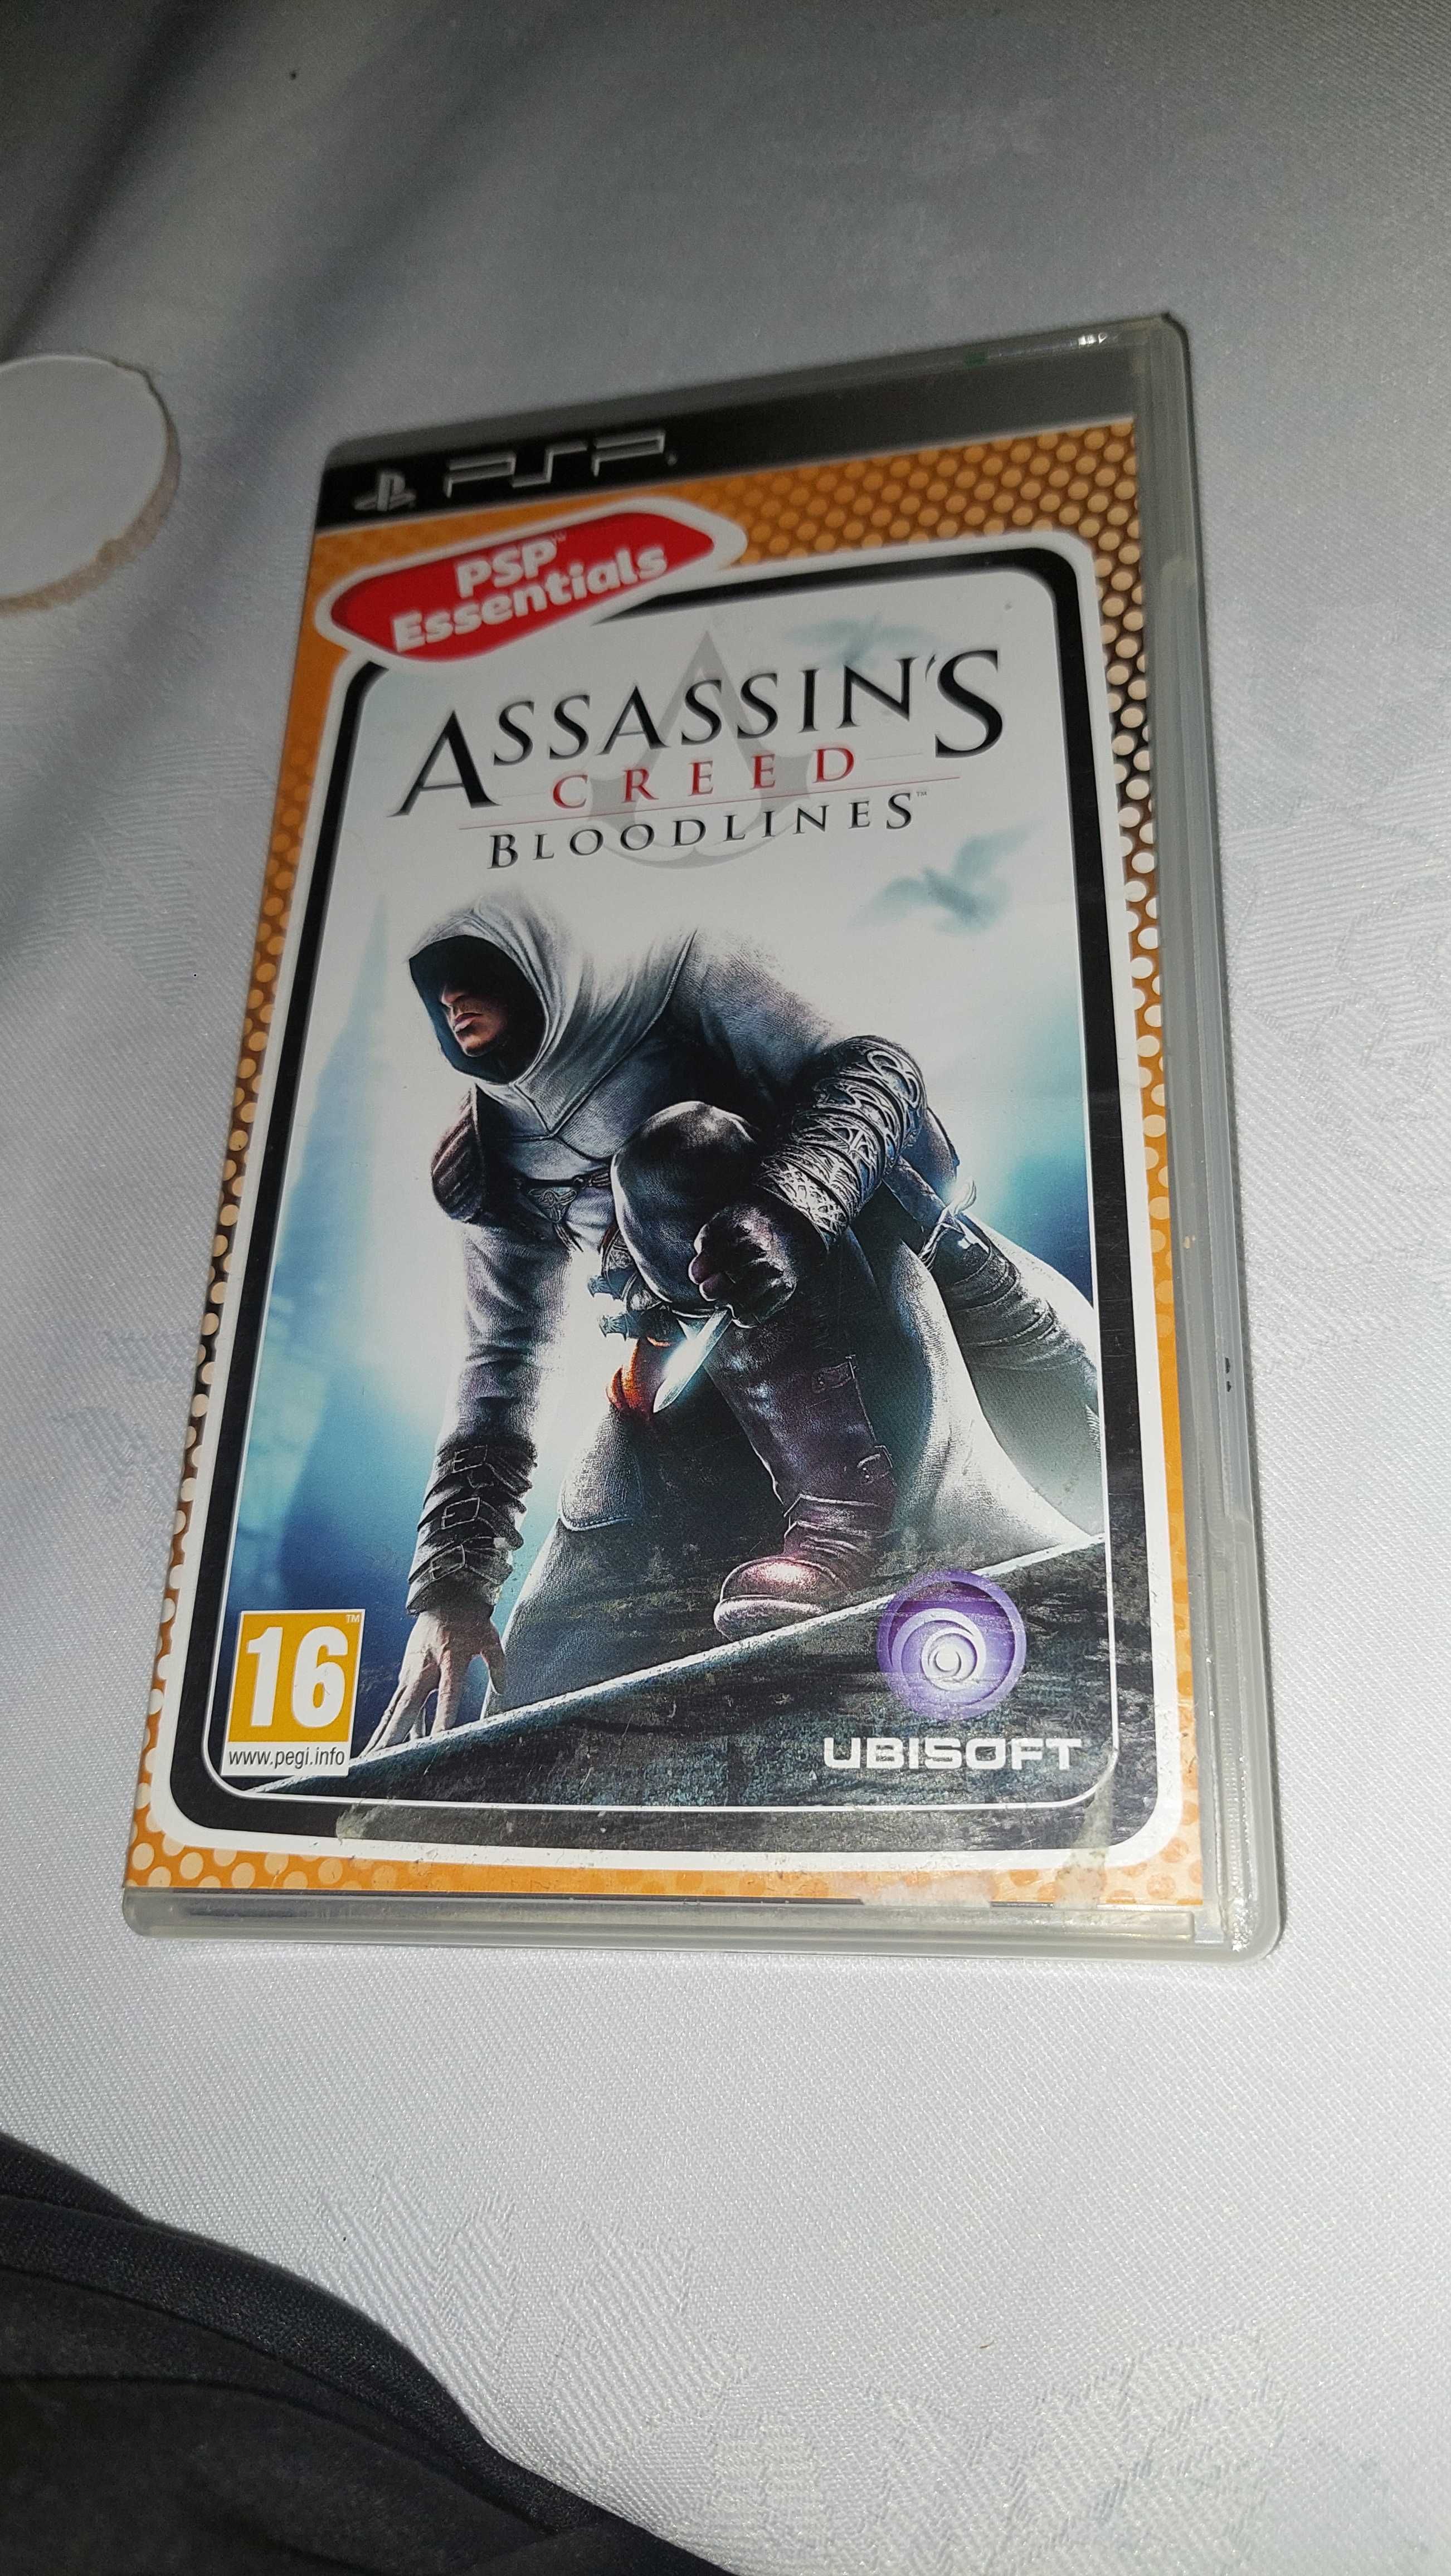 Psp assasin's creed bloodlines